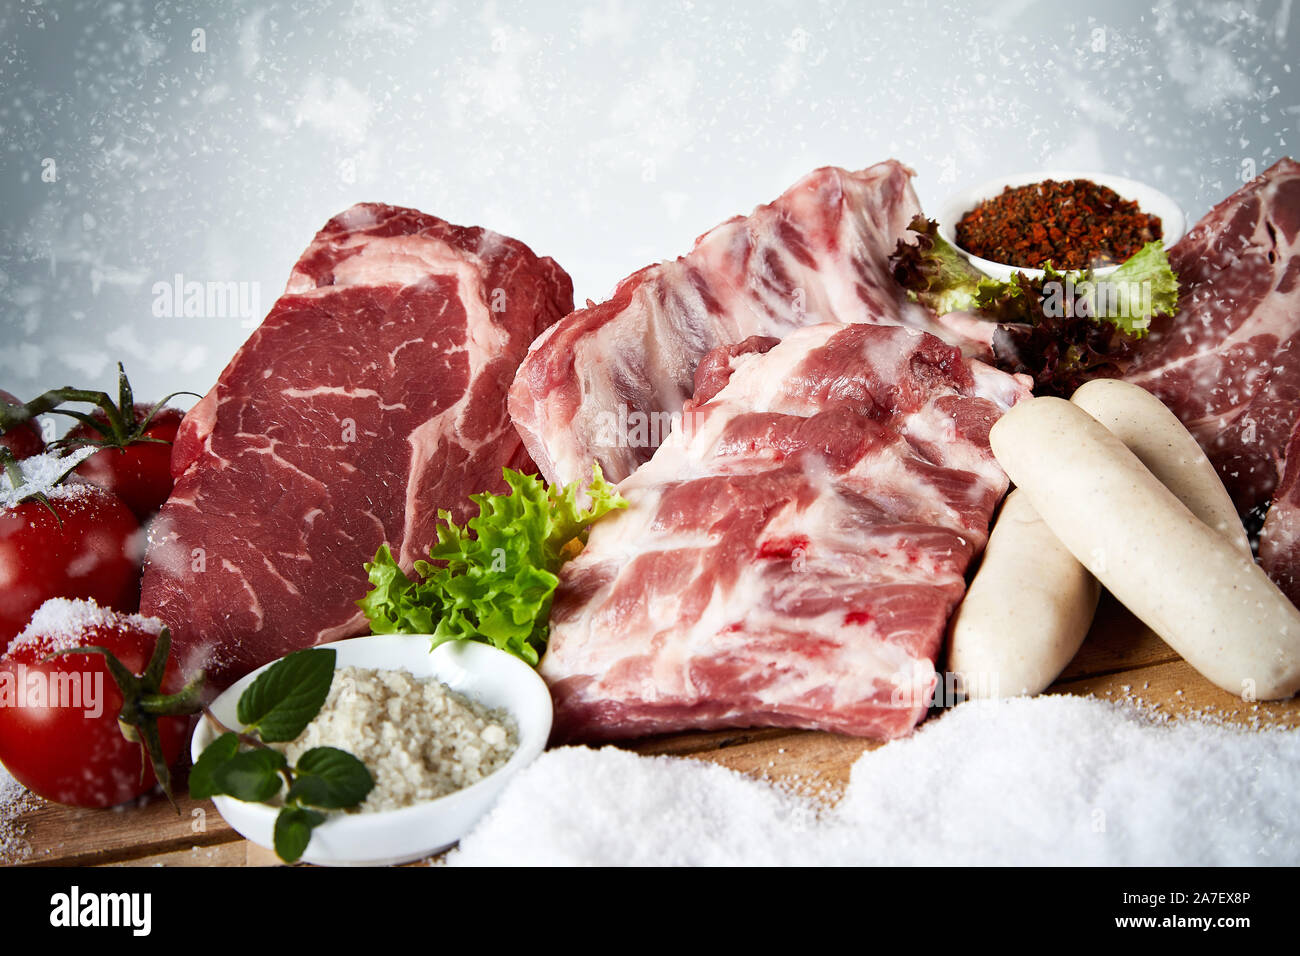 Raw beef steak, spare ribs and veal sausage on snow ready for a seasonal winter BBQ displayed with spices, and tomatoes suitable for butchery advertis Stock Photo